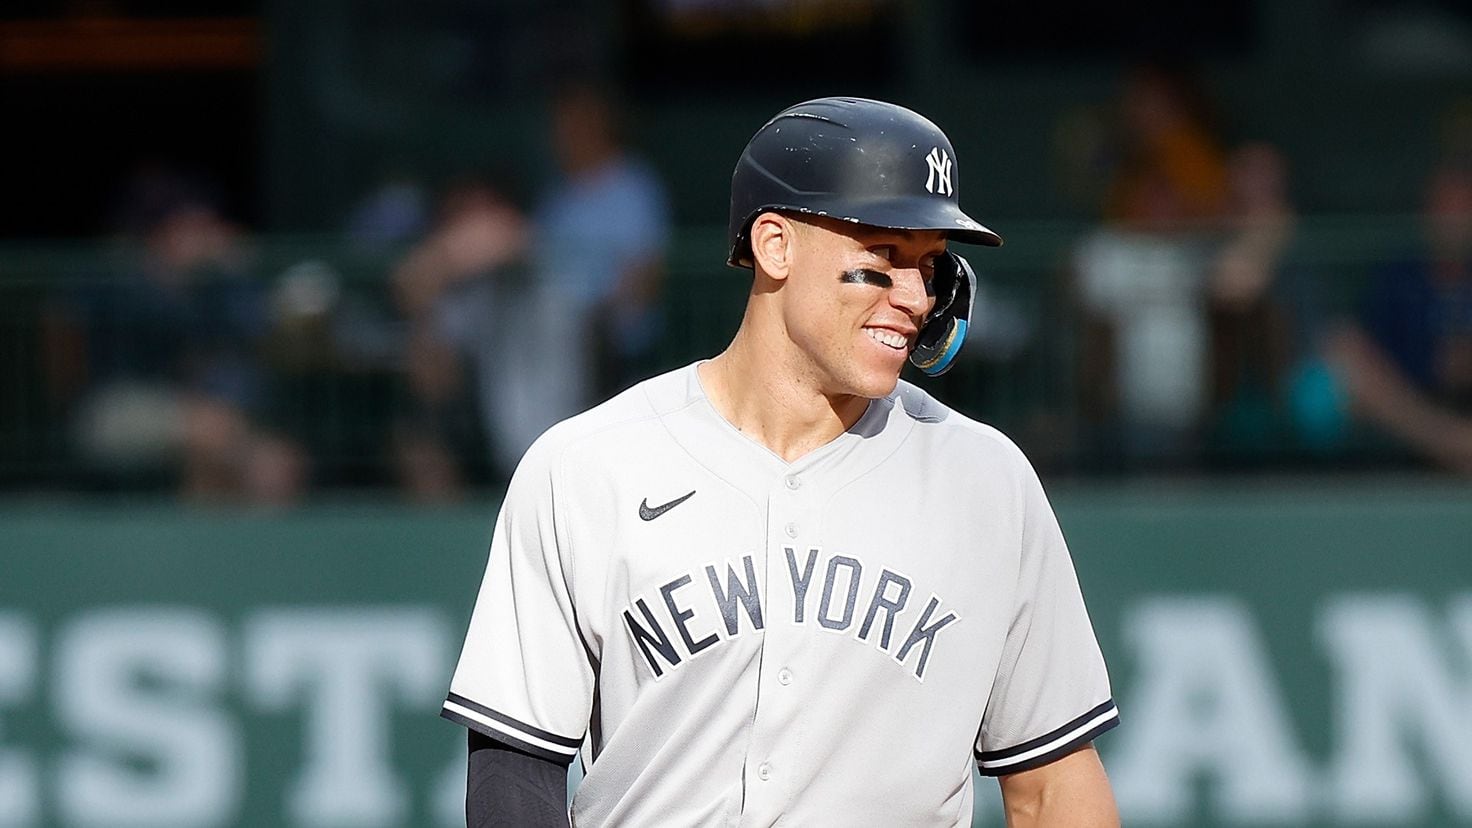 Aaron Judge hits two home runs to give him 57 on the season as